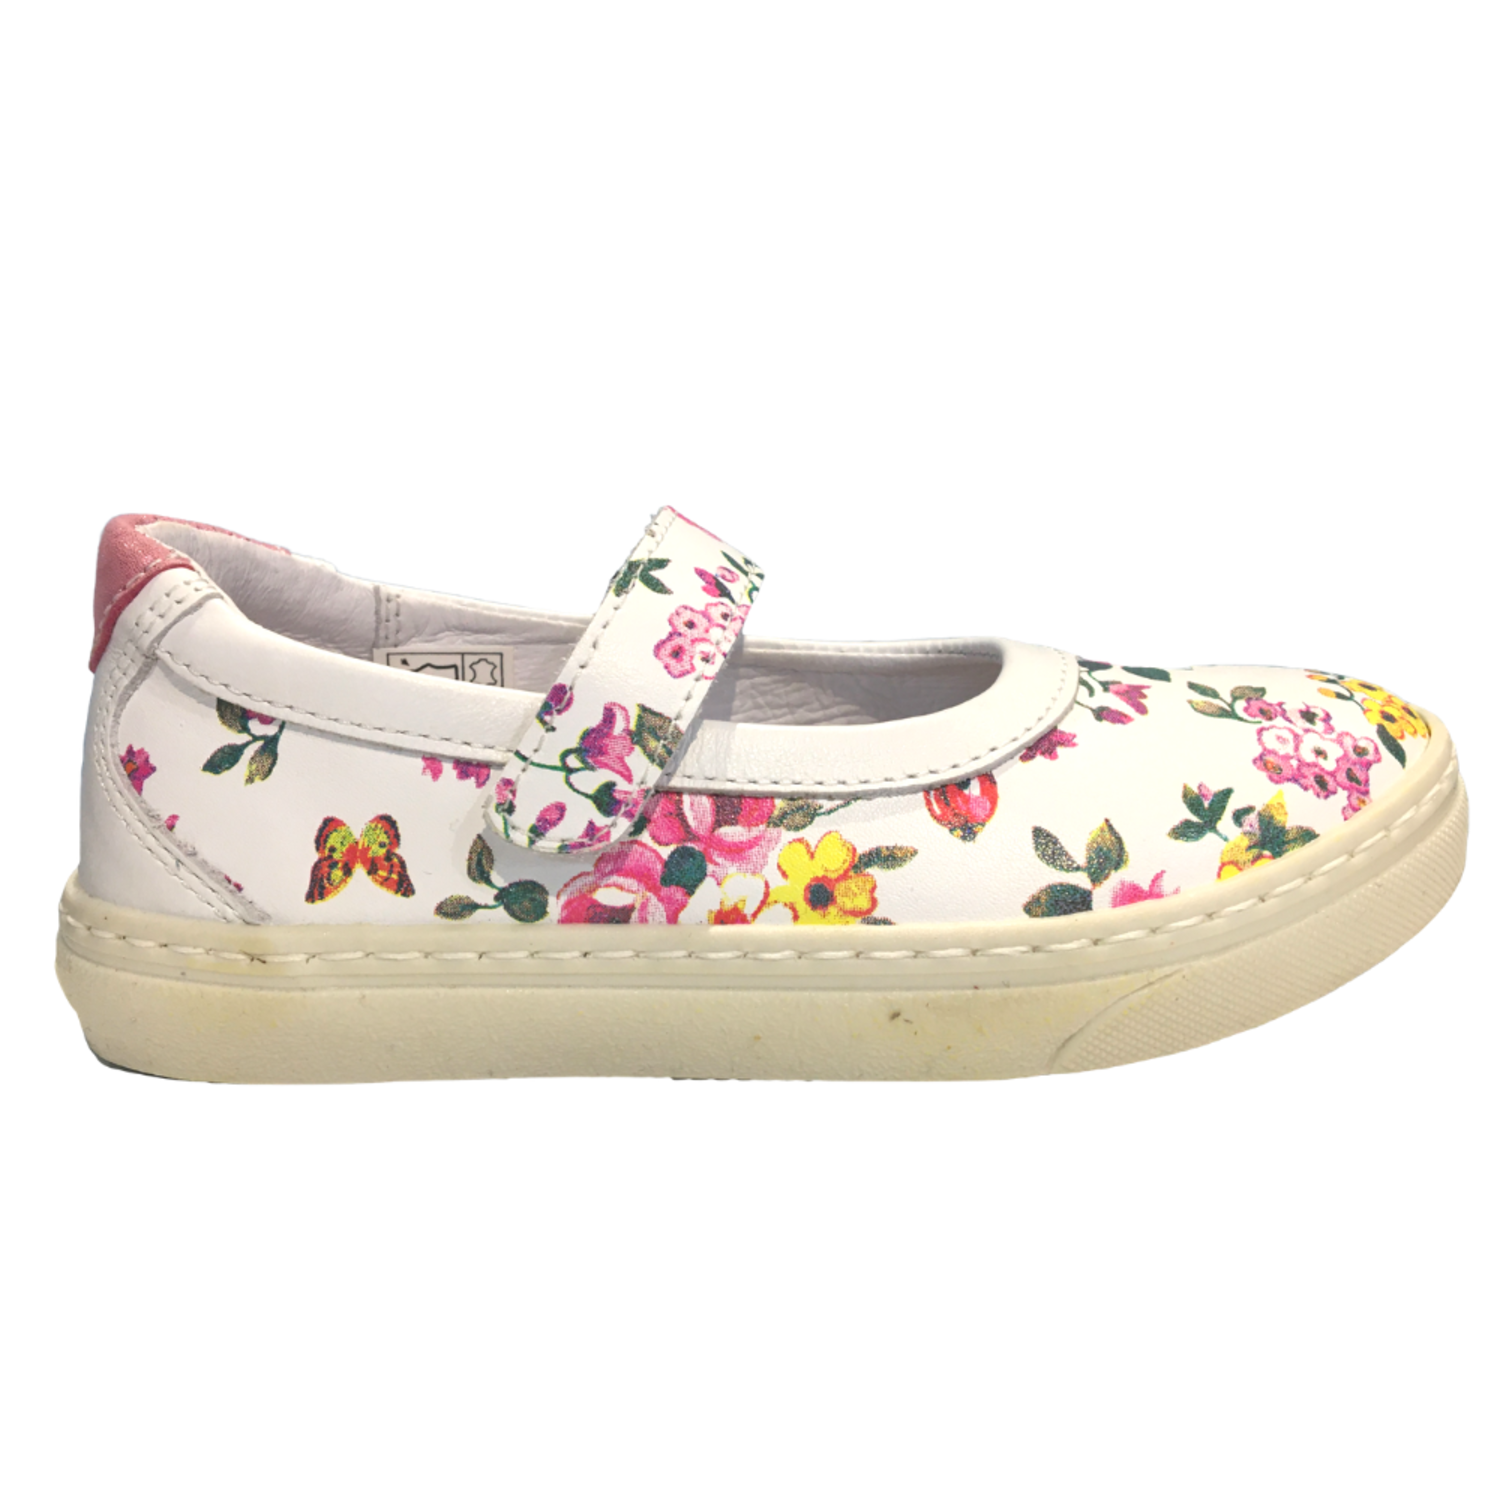 GIRLS KIDS SLIP-ON PINK FLOWER FLORAL PUMPS DOLLY CANVAS FLAT SHOES SIZES 2